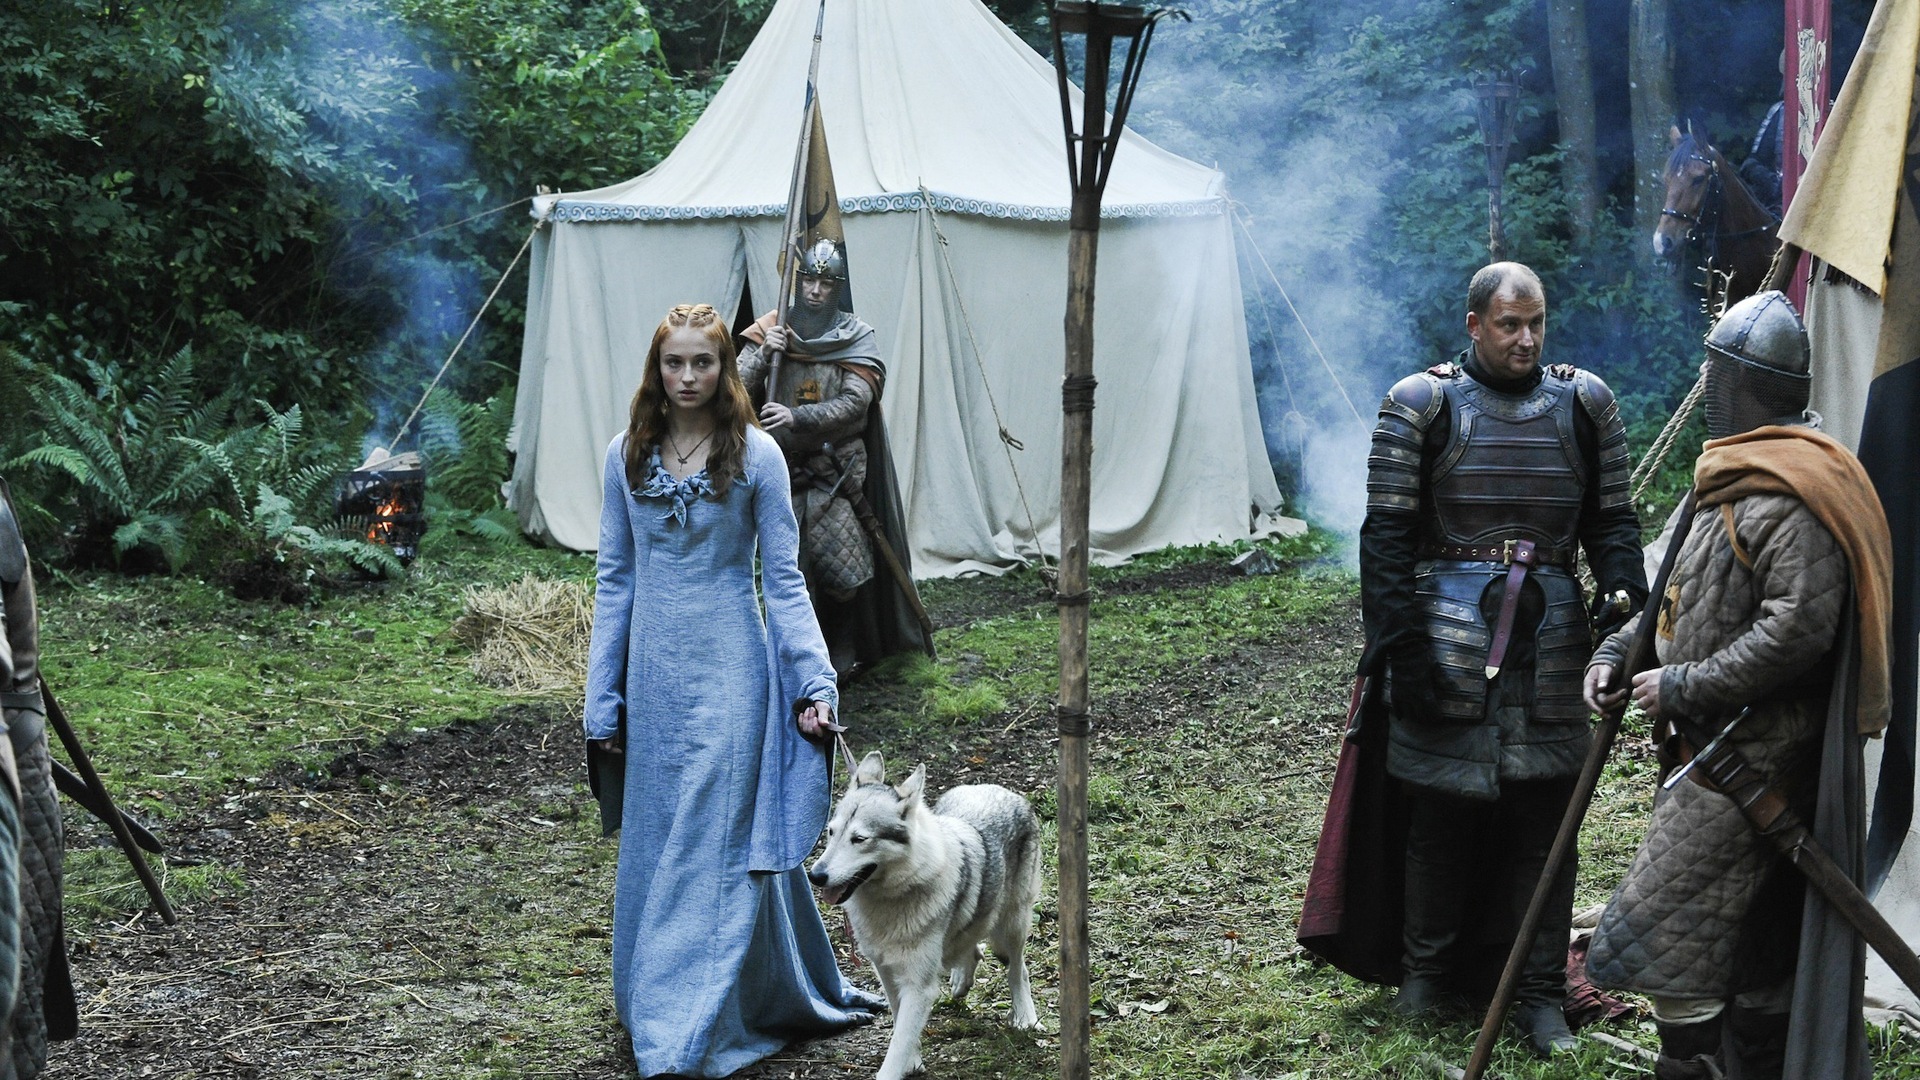 A Song of Ice and Fire: Game of Thrones 冰與火之歌：權力的遊戲高清壁紙 #46 - 1920x1080